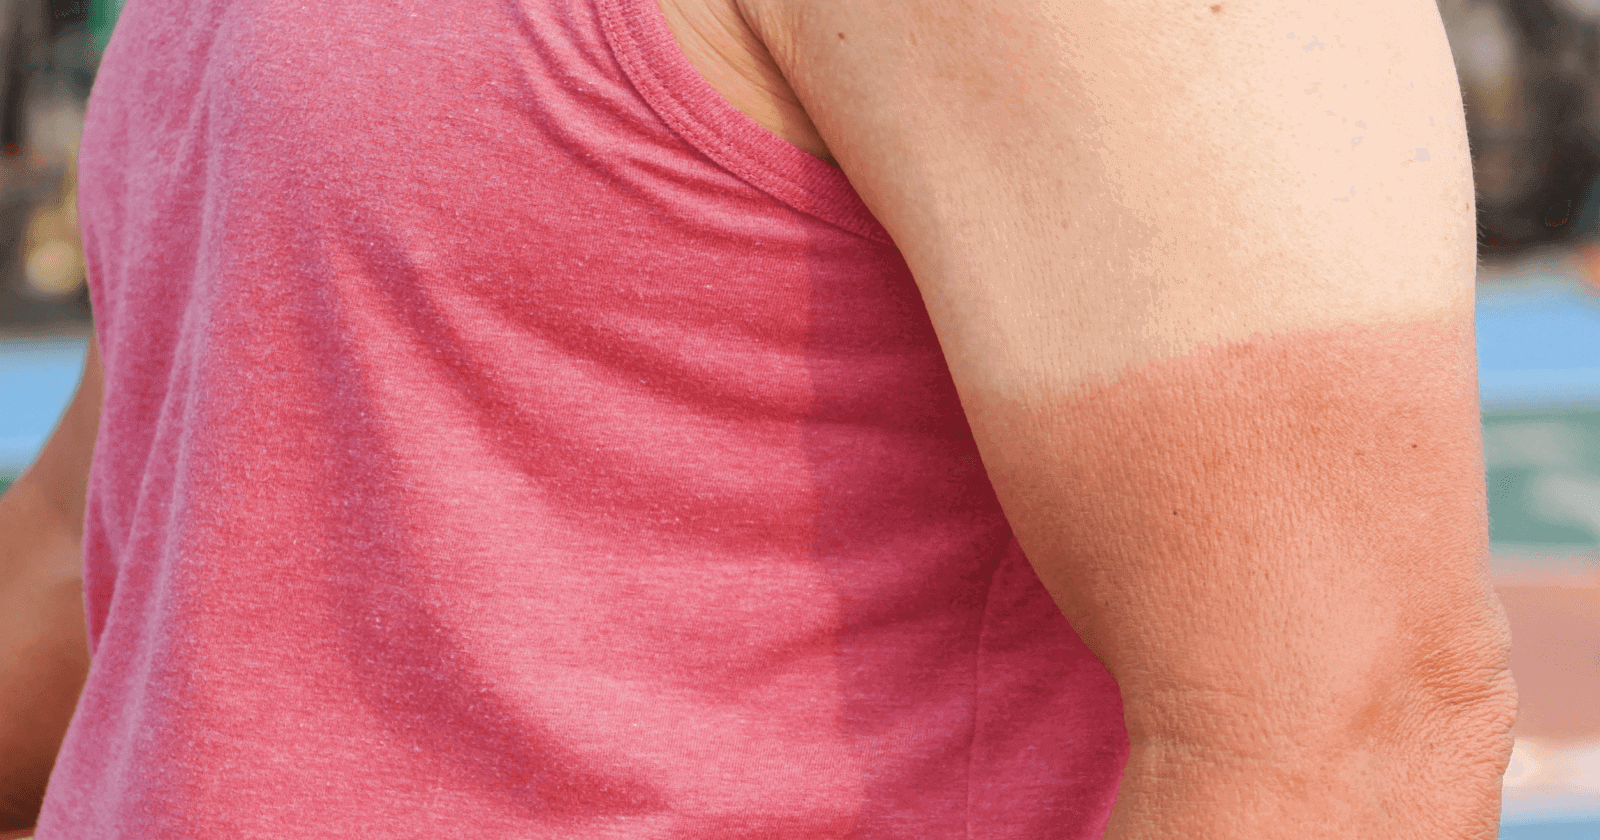 first aid guide for sunburn